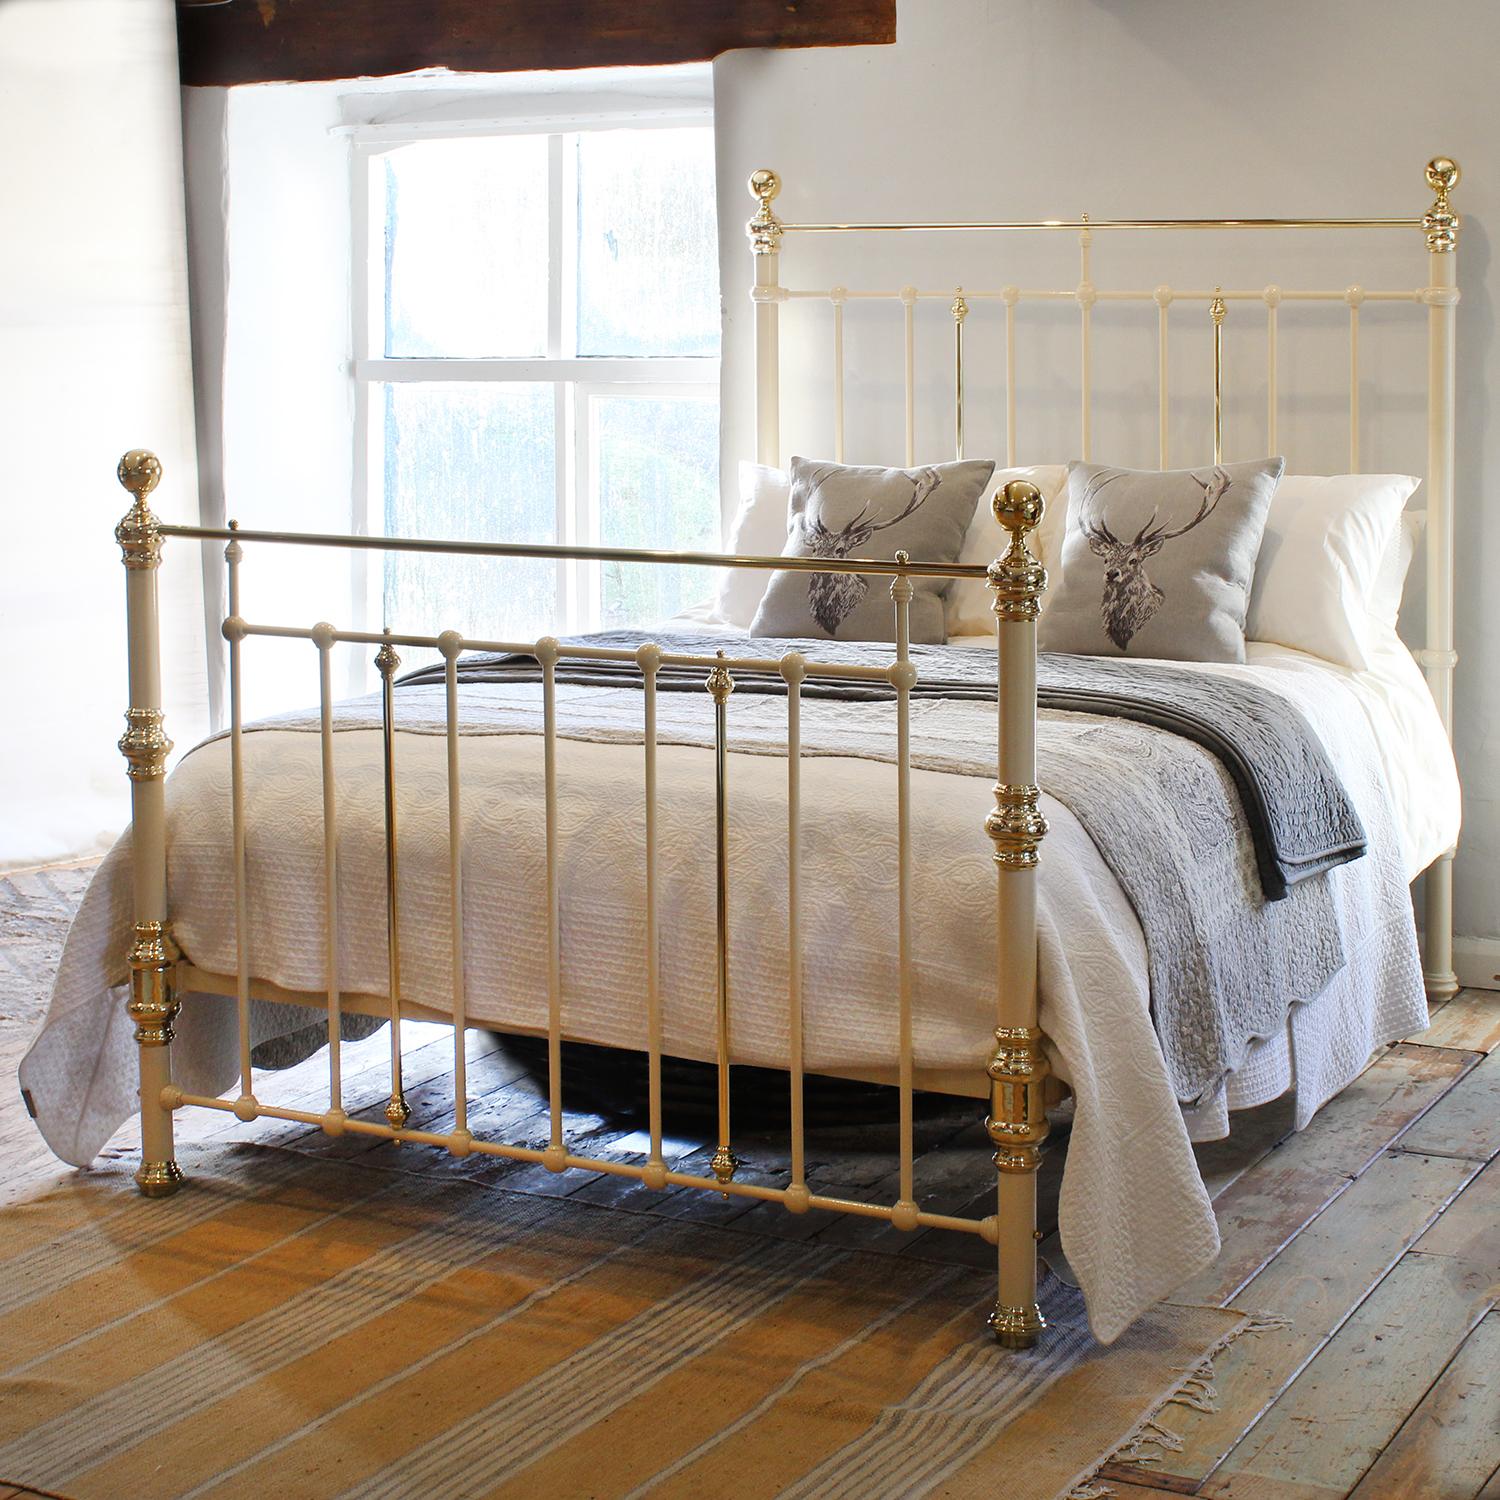 An attractive cast iron Victorian antique bed finished in cream with brass decoration.

This bed accepts a UK king size or US queen size (5ft, 60in or 150cm wide) base and mattress set.

The price includes a standard firm bed base to support the